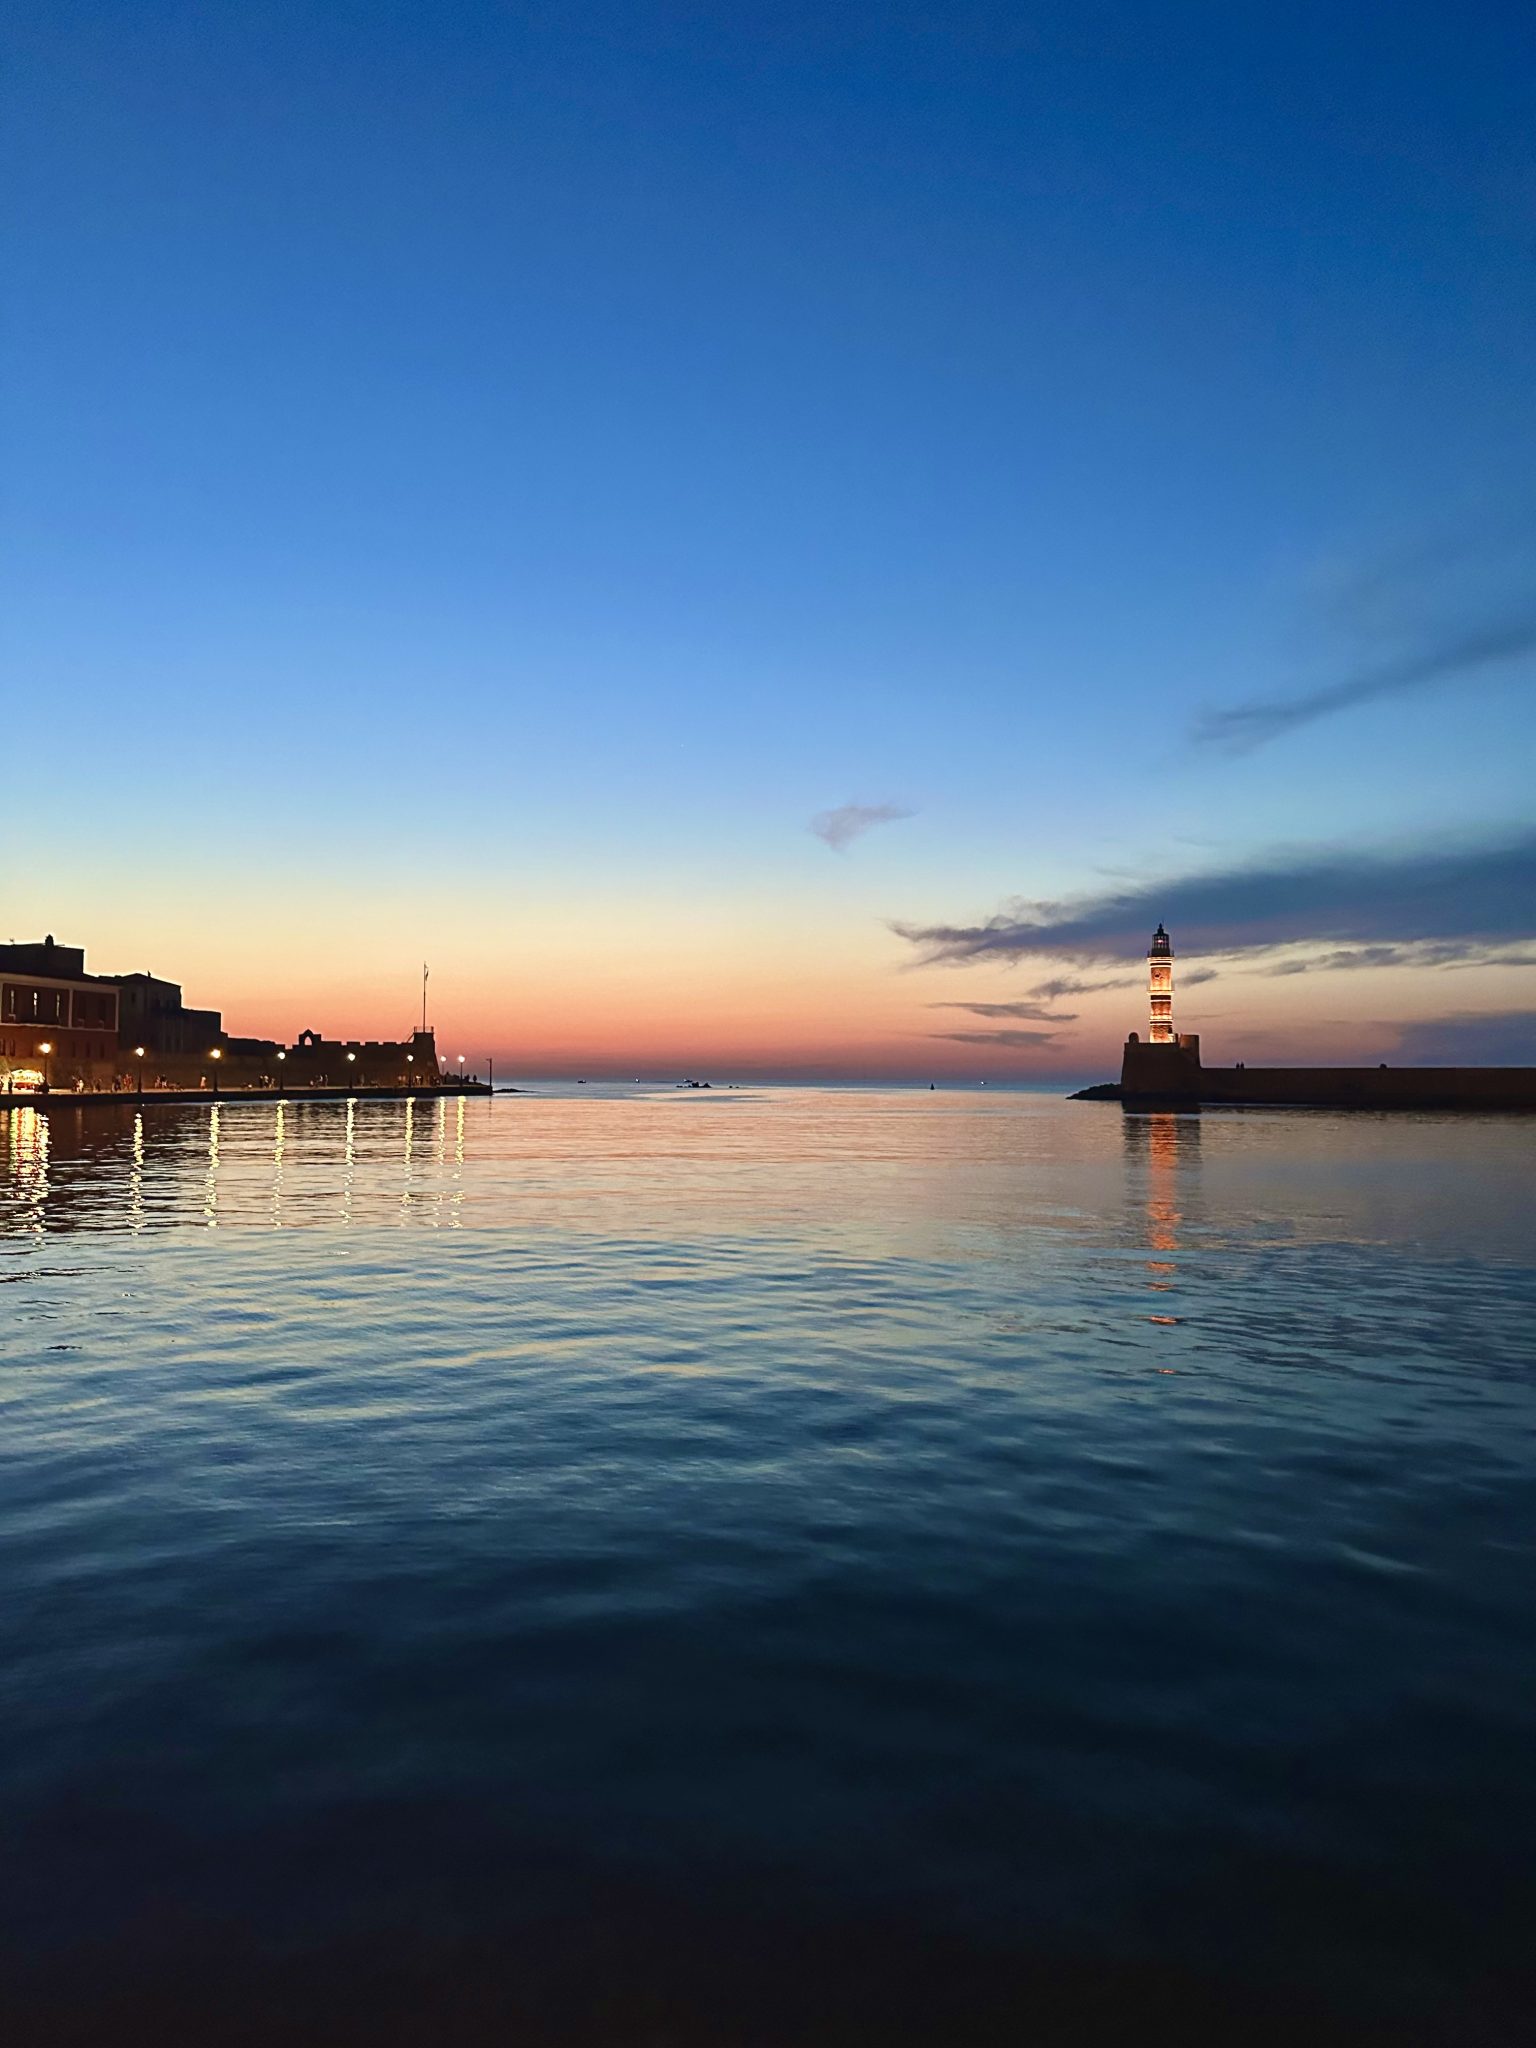 The Lighthouse of Chania, lit up at sunset.